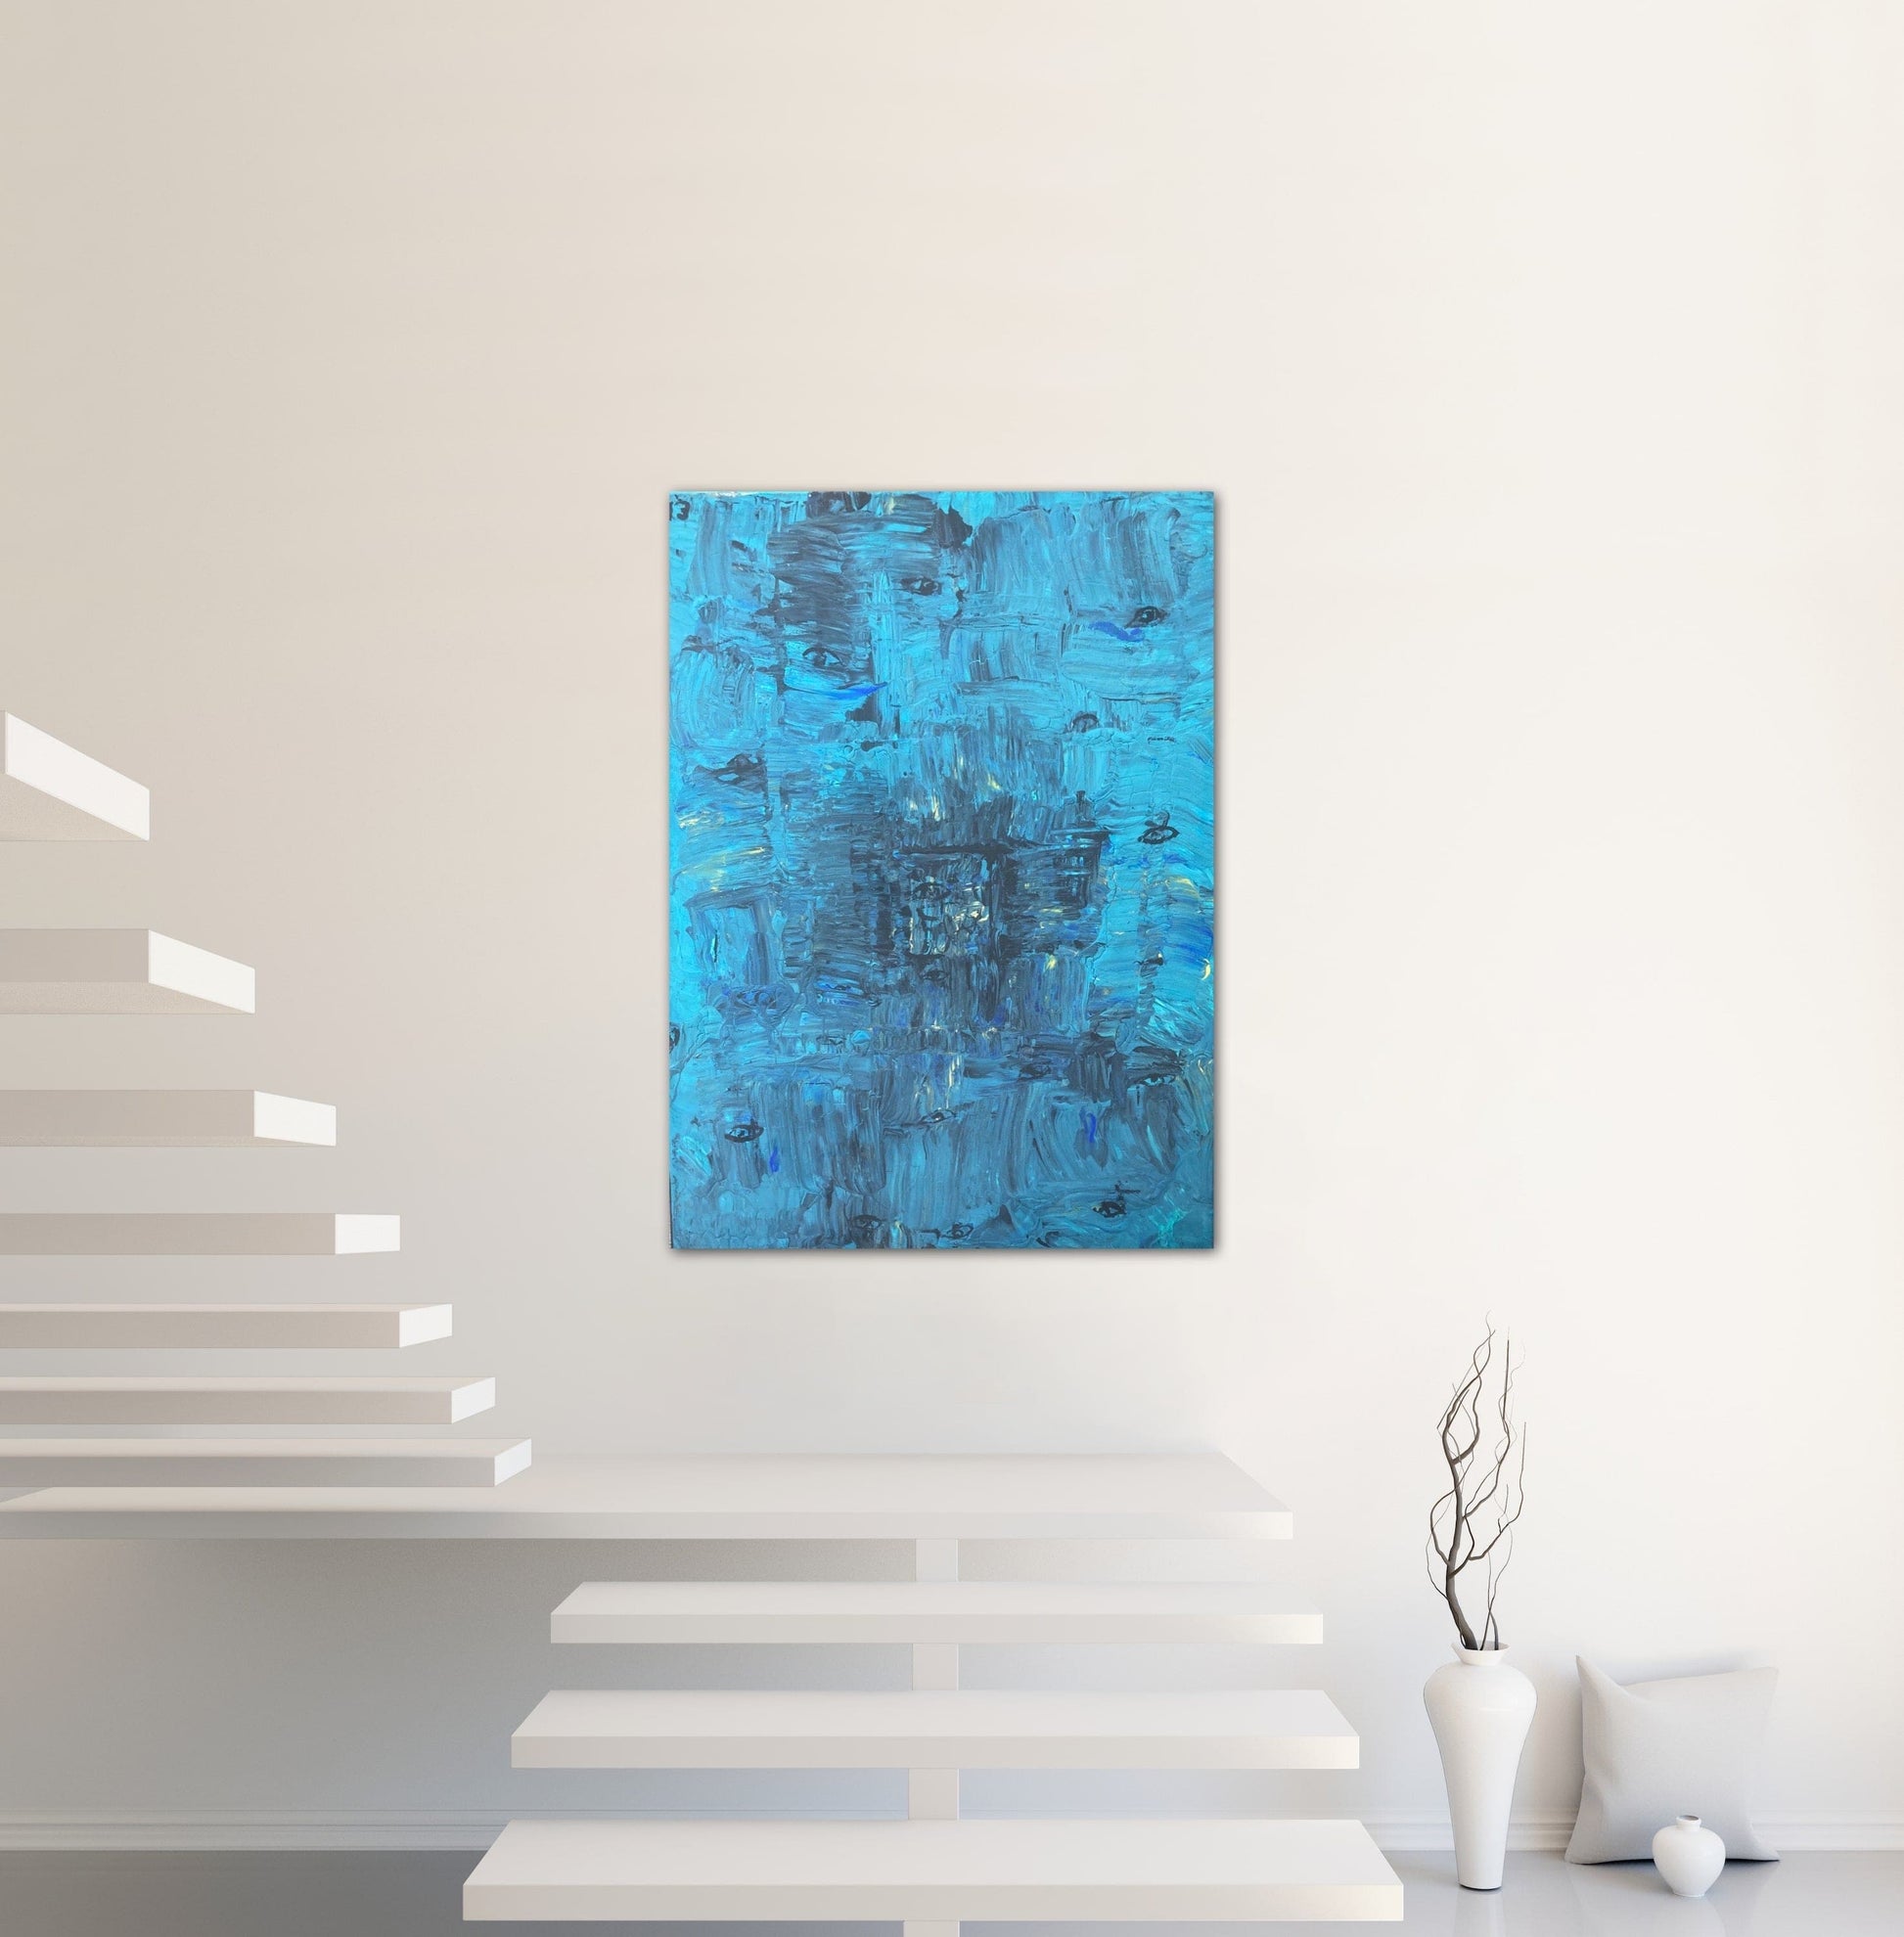 Window To My Soul - Large Textured, Blue Painting With Eyes And A Window, Acrylic Wall Art Design, By Art With Evie